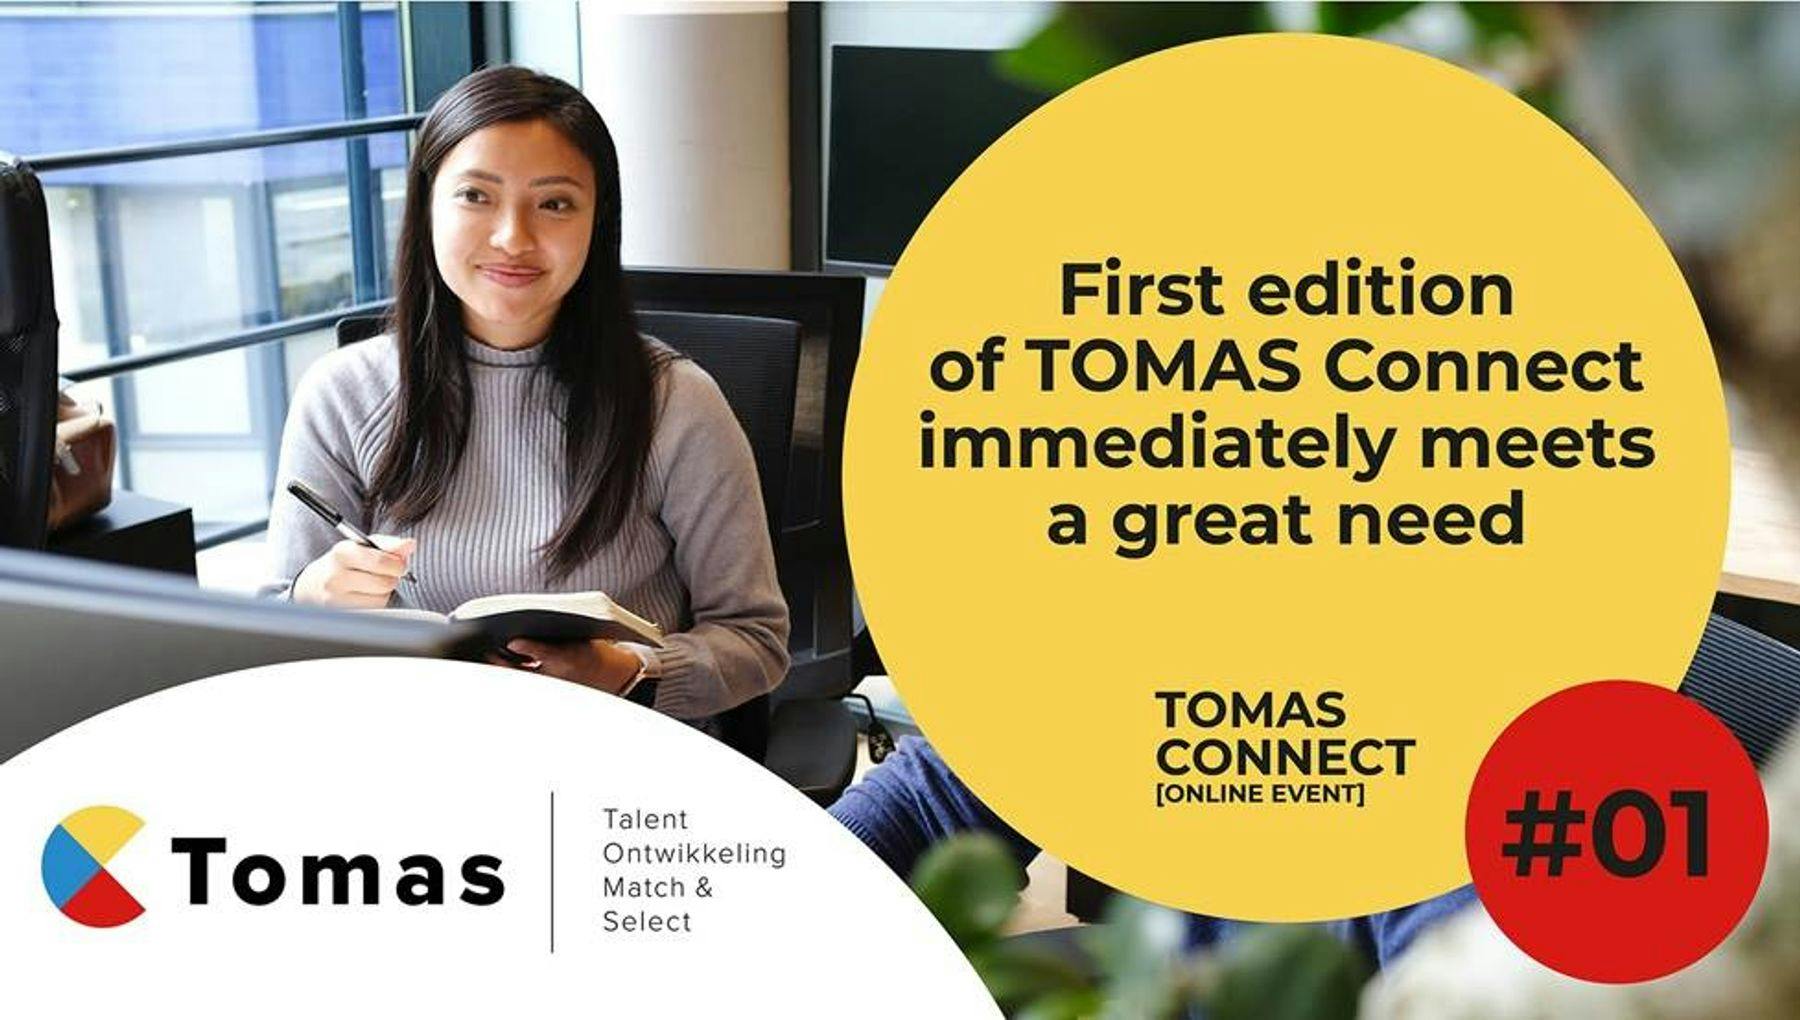 Tomas Connect tech talent matchmaking event promotional banner